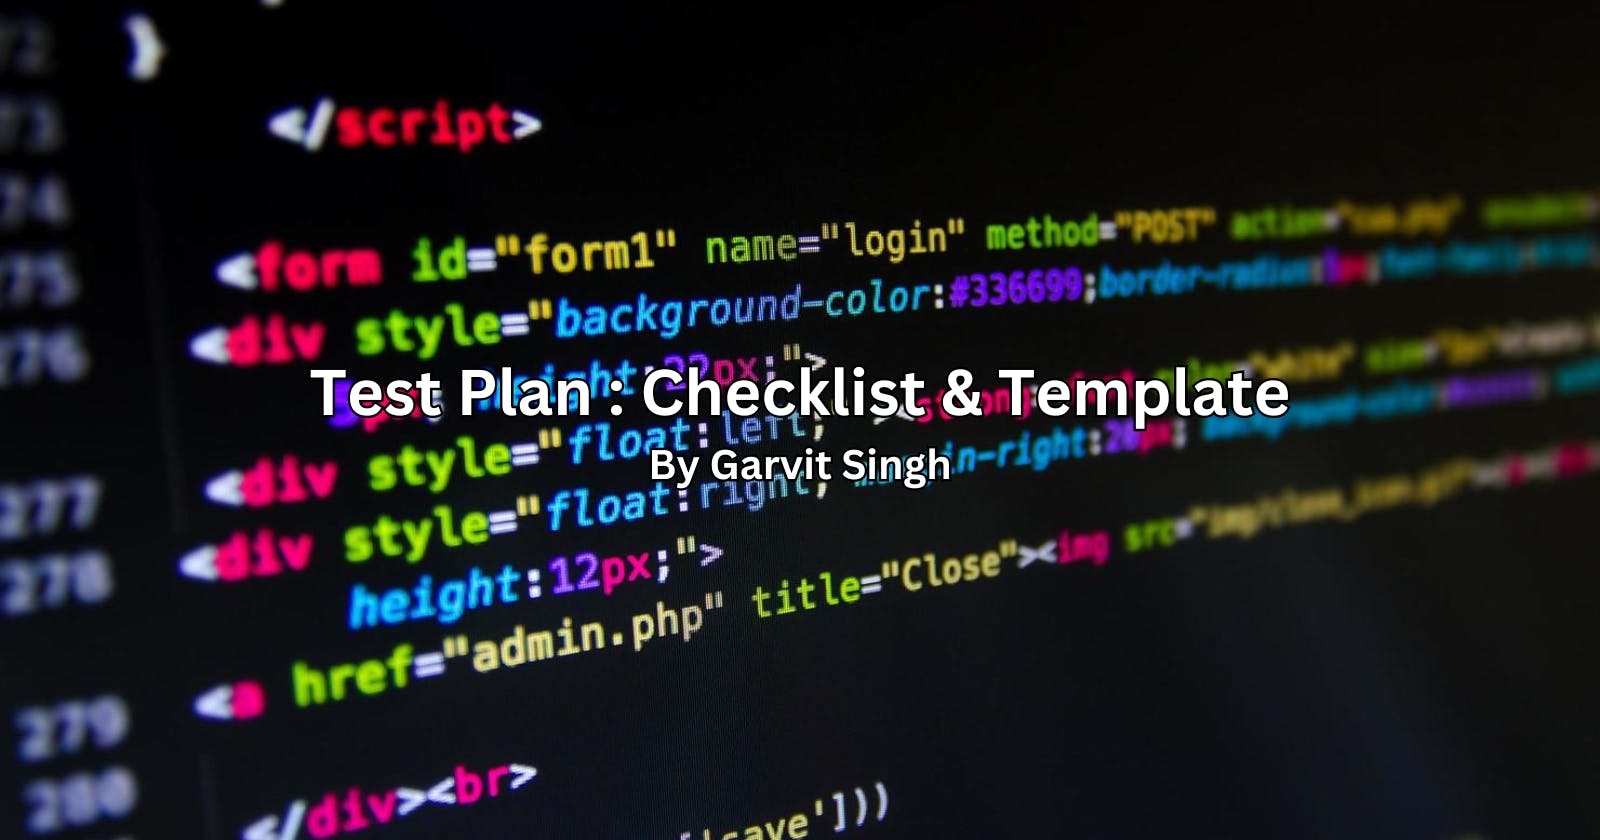 Checklist + Template For Test Planning, Management, Execution and Reporting